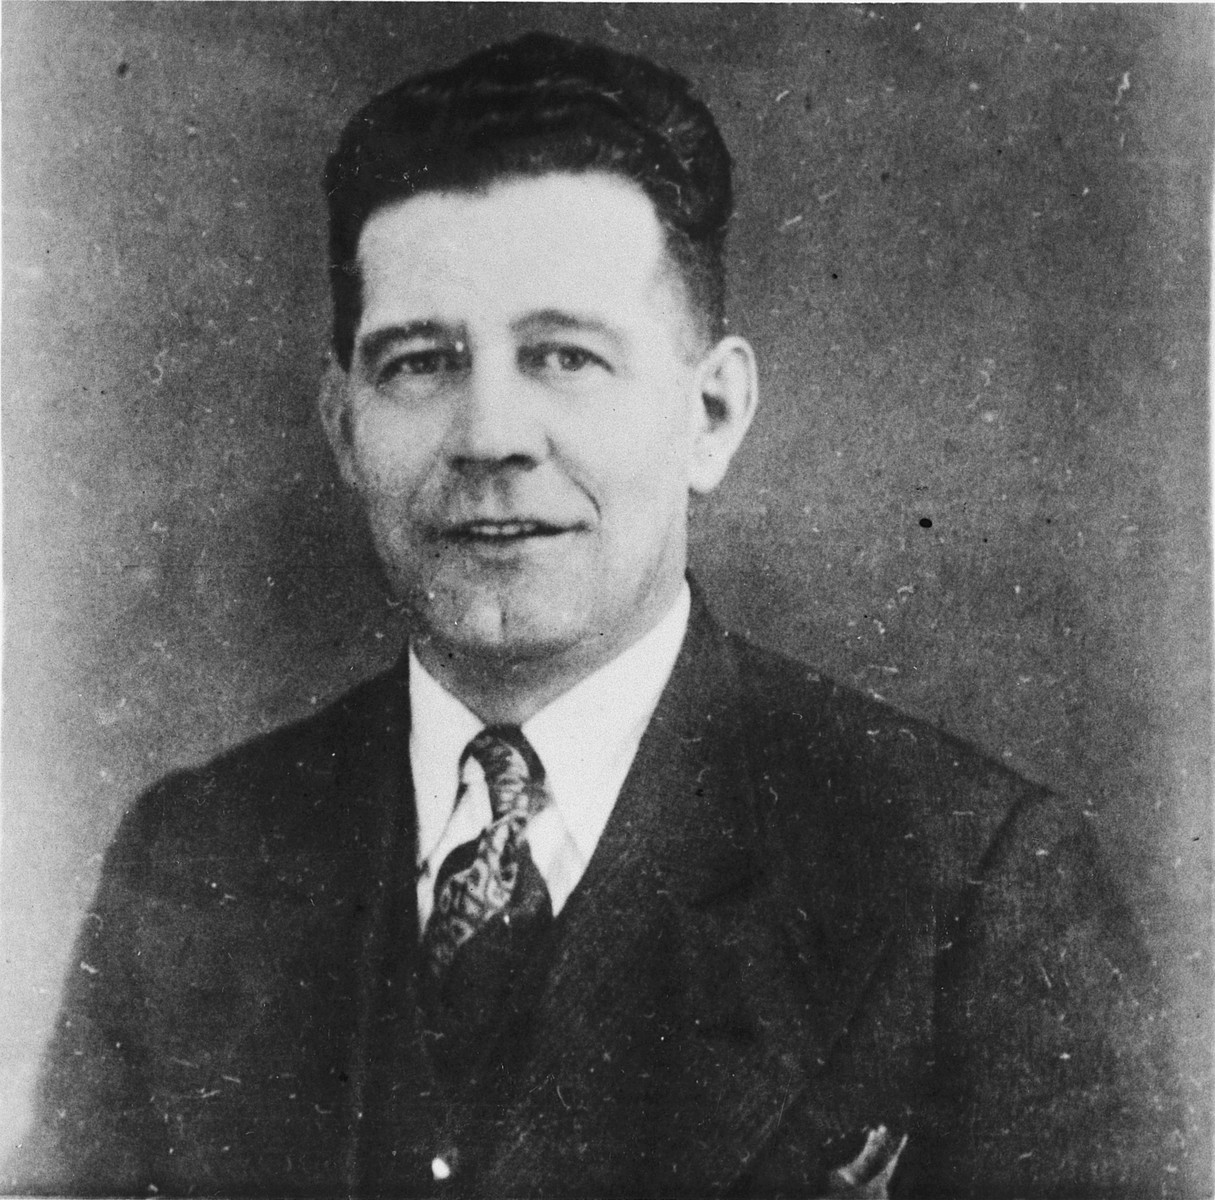 Photograph of Major van Roosbroeck prior to his incarceration in the Breendonck internment camp.